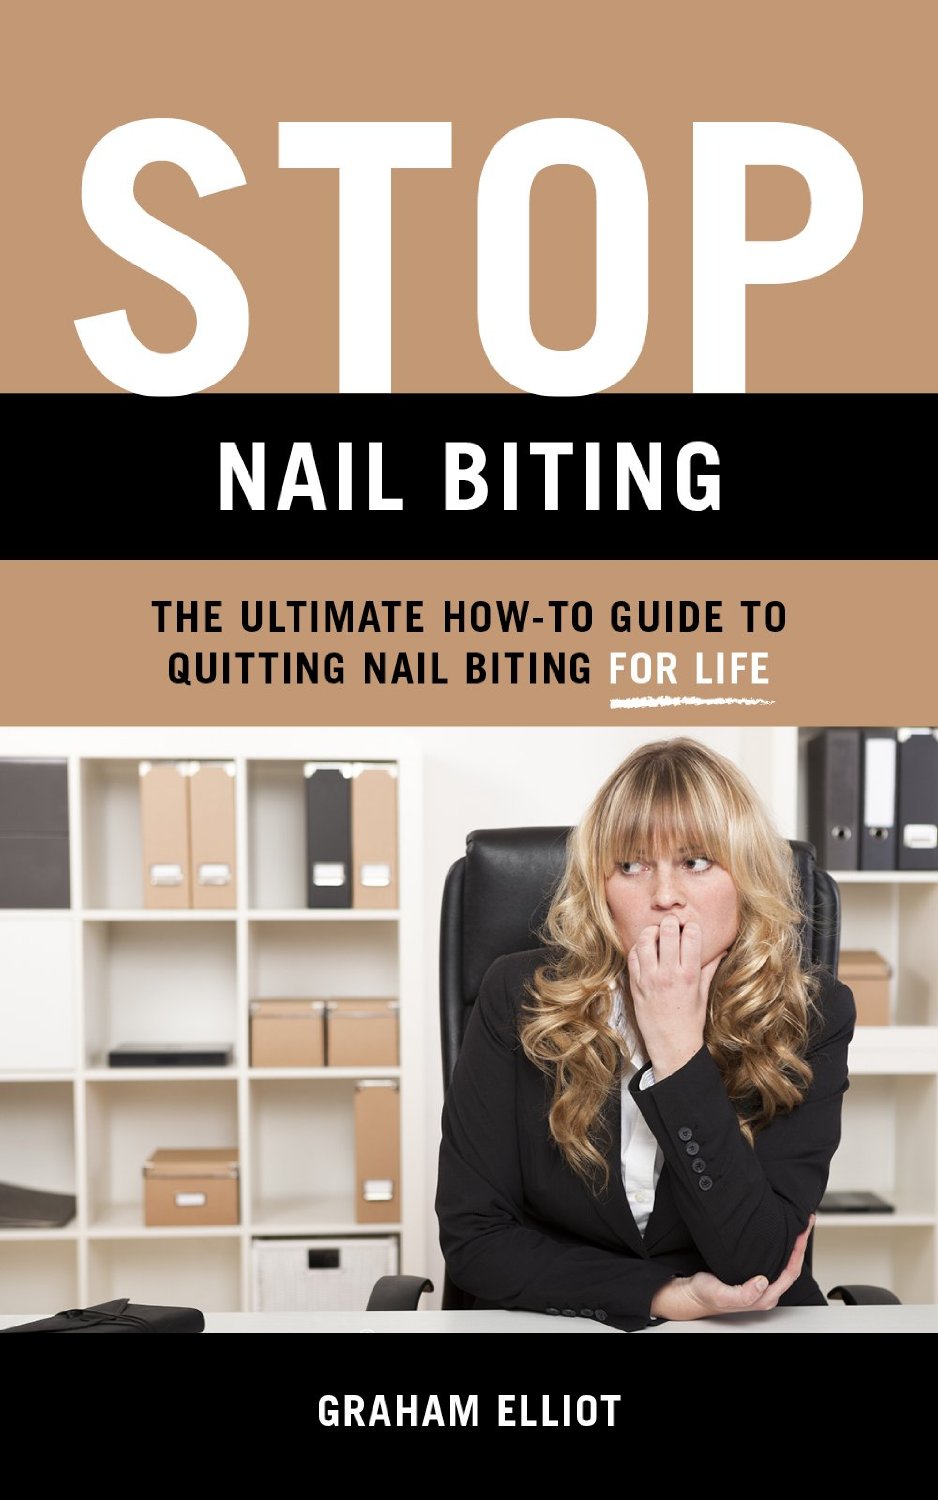 Stop Nail Biting: The Ultimate How-To Guide to Quitting Nail Biting for Life by Graham Elliot